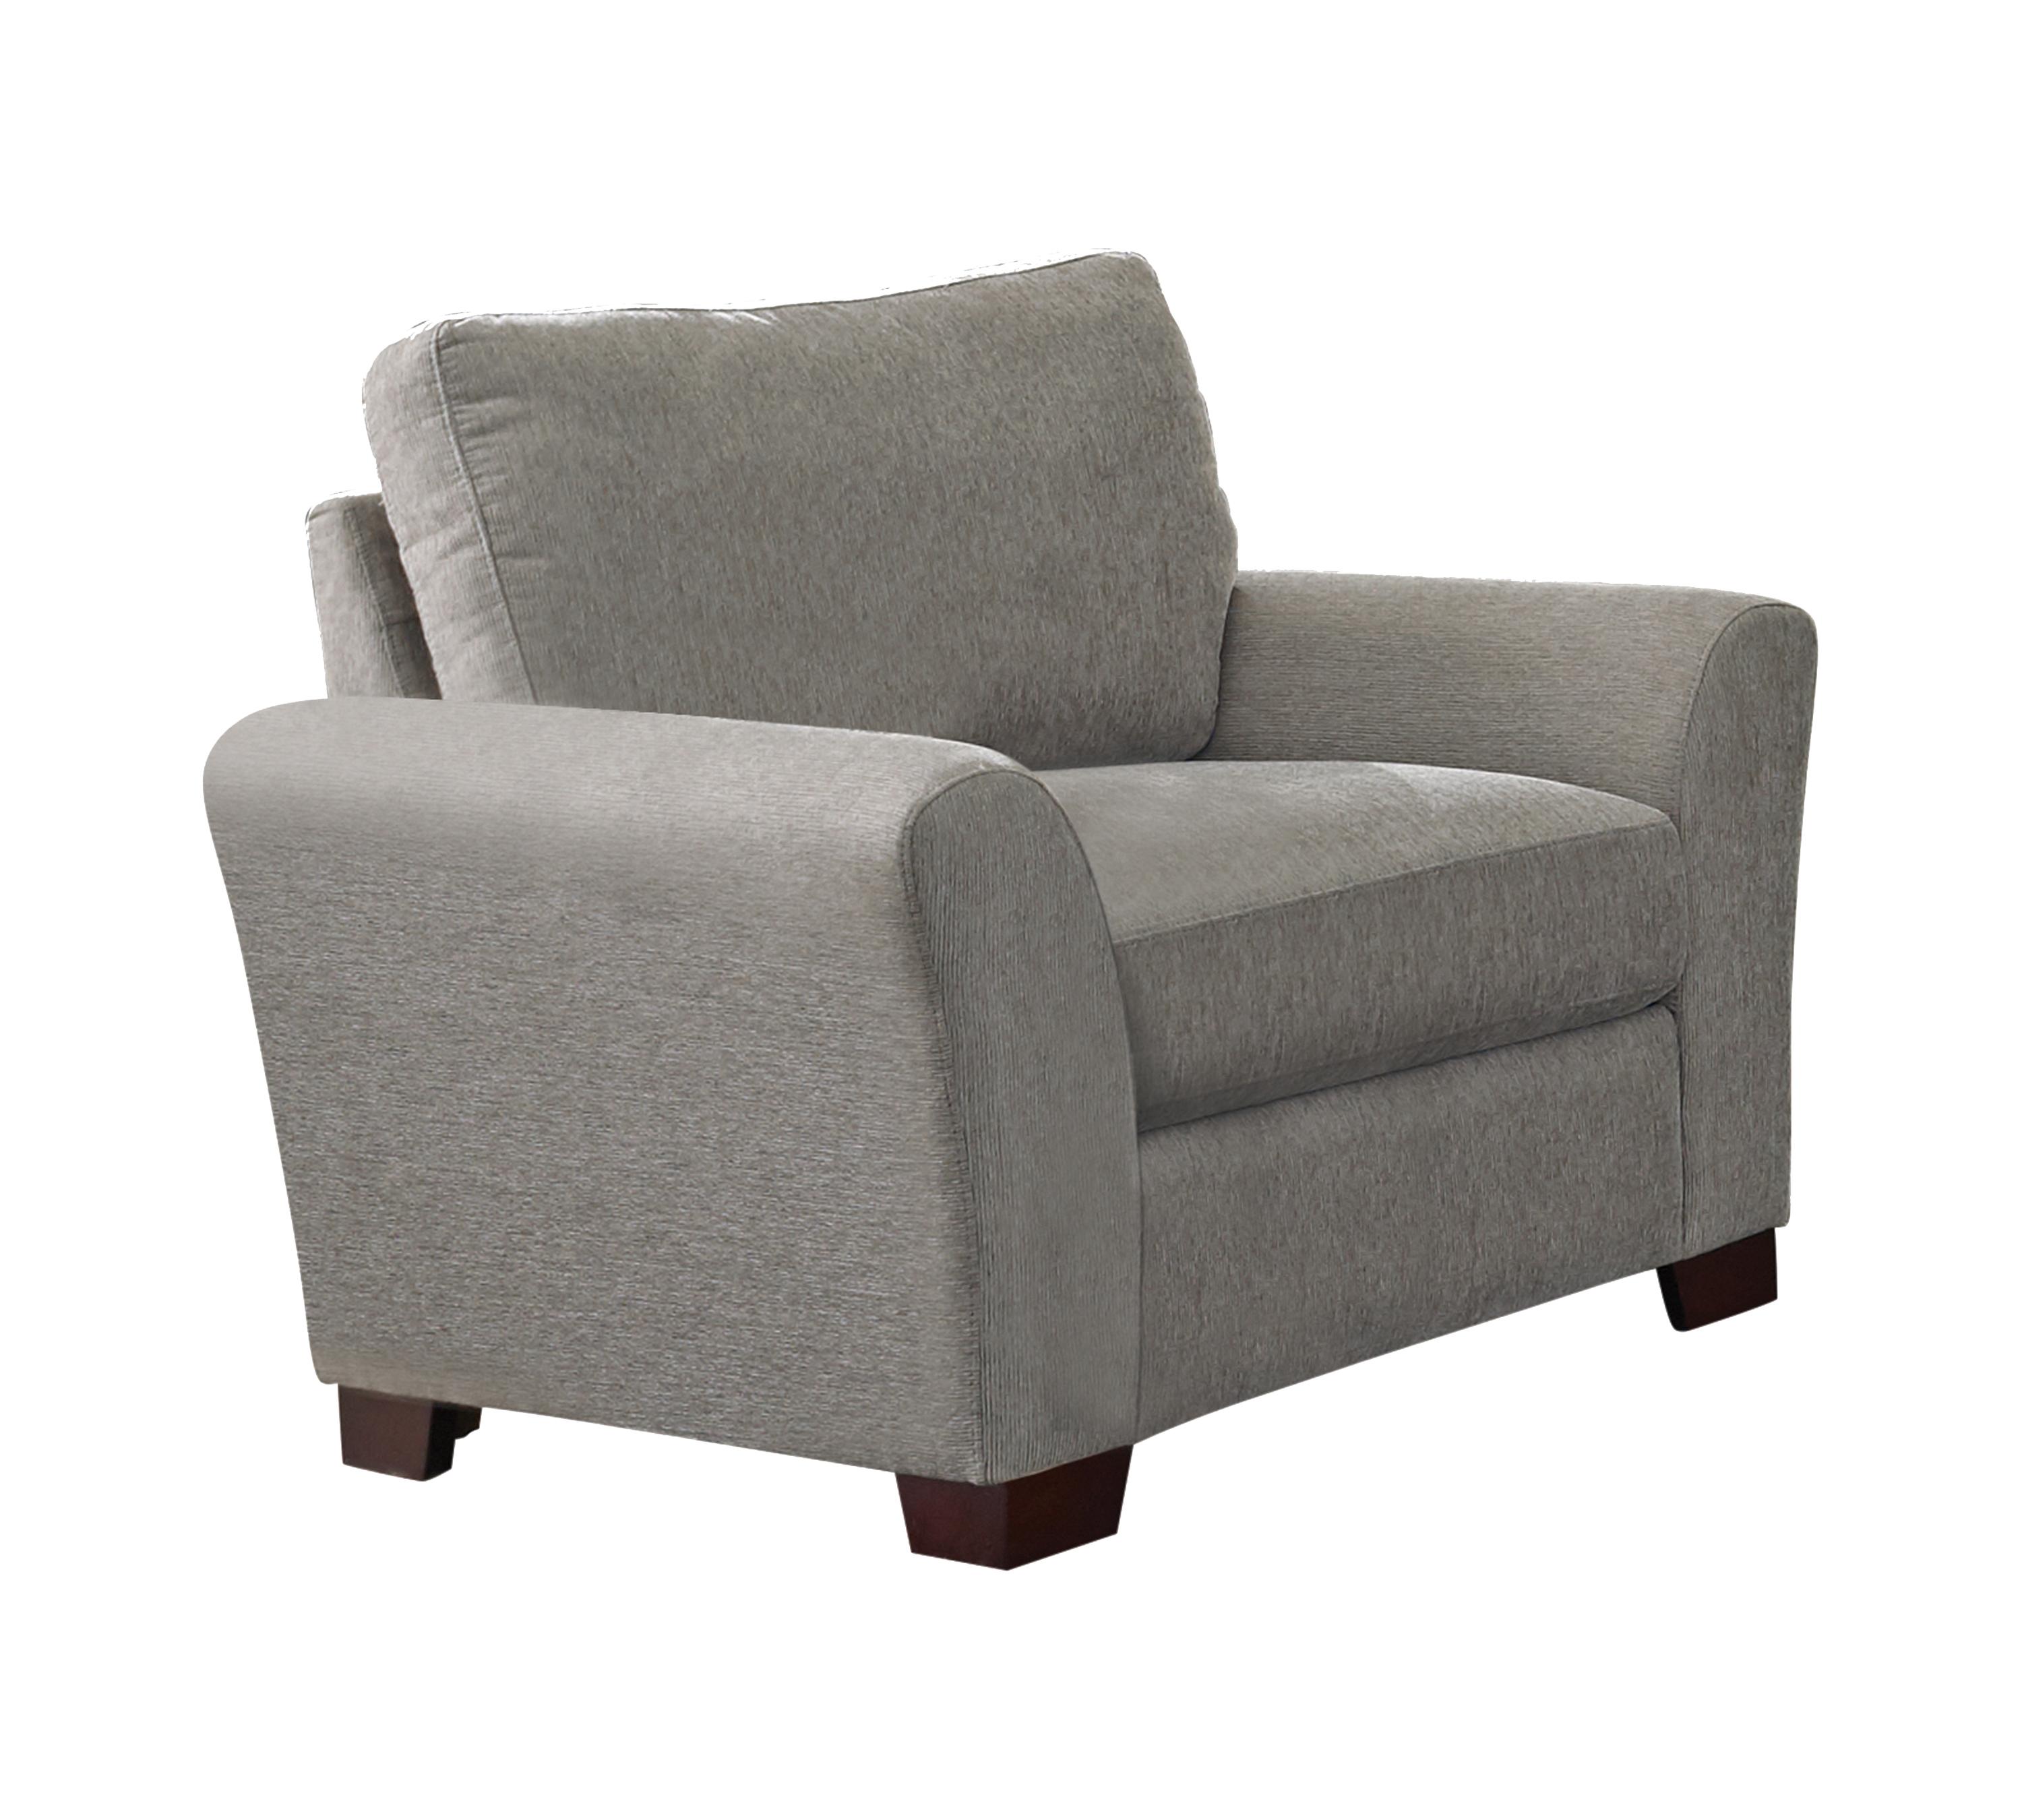 Transitional Arm Chair 509723 Drayton 509723 in Warm Gray 